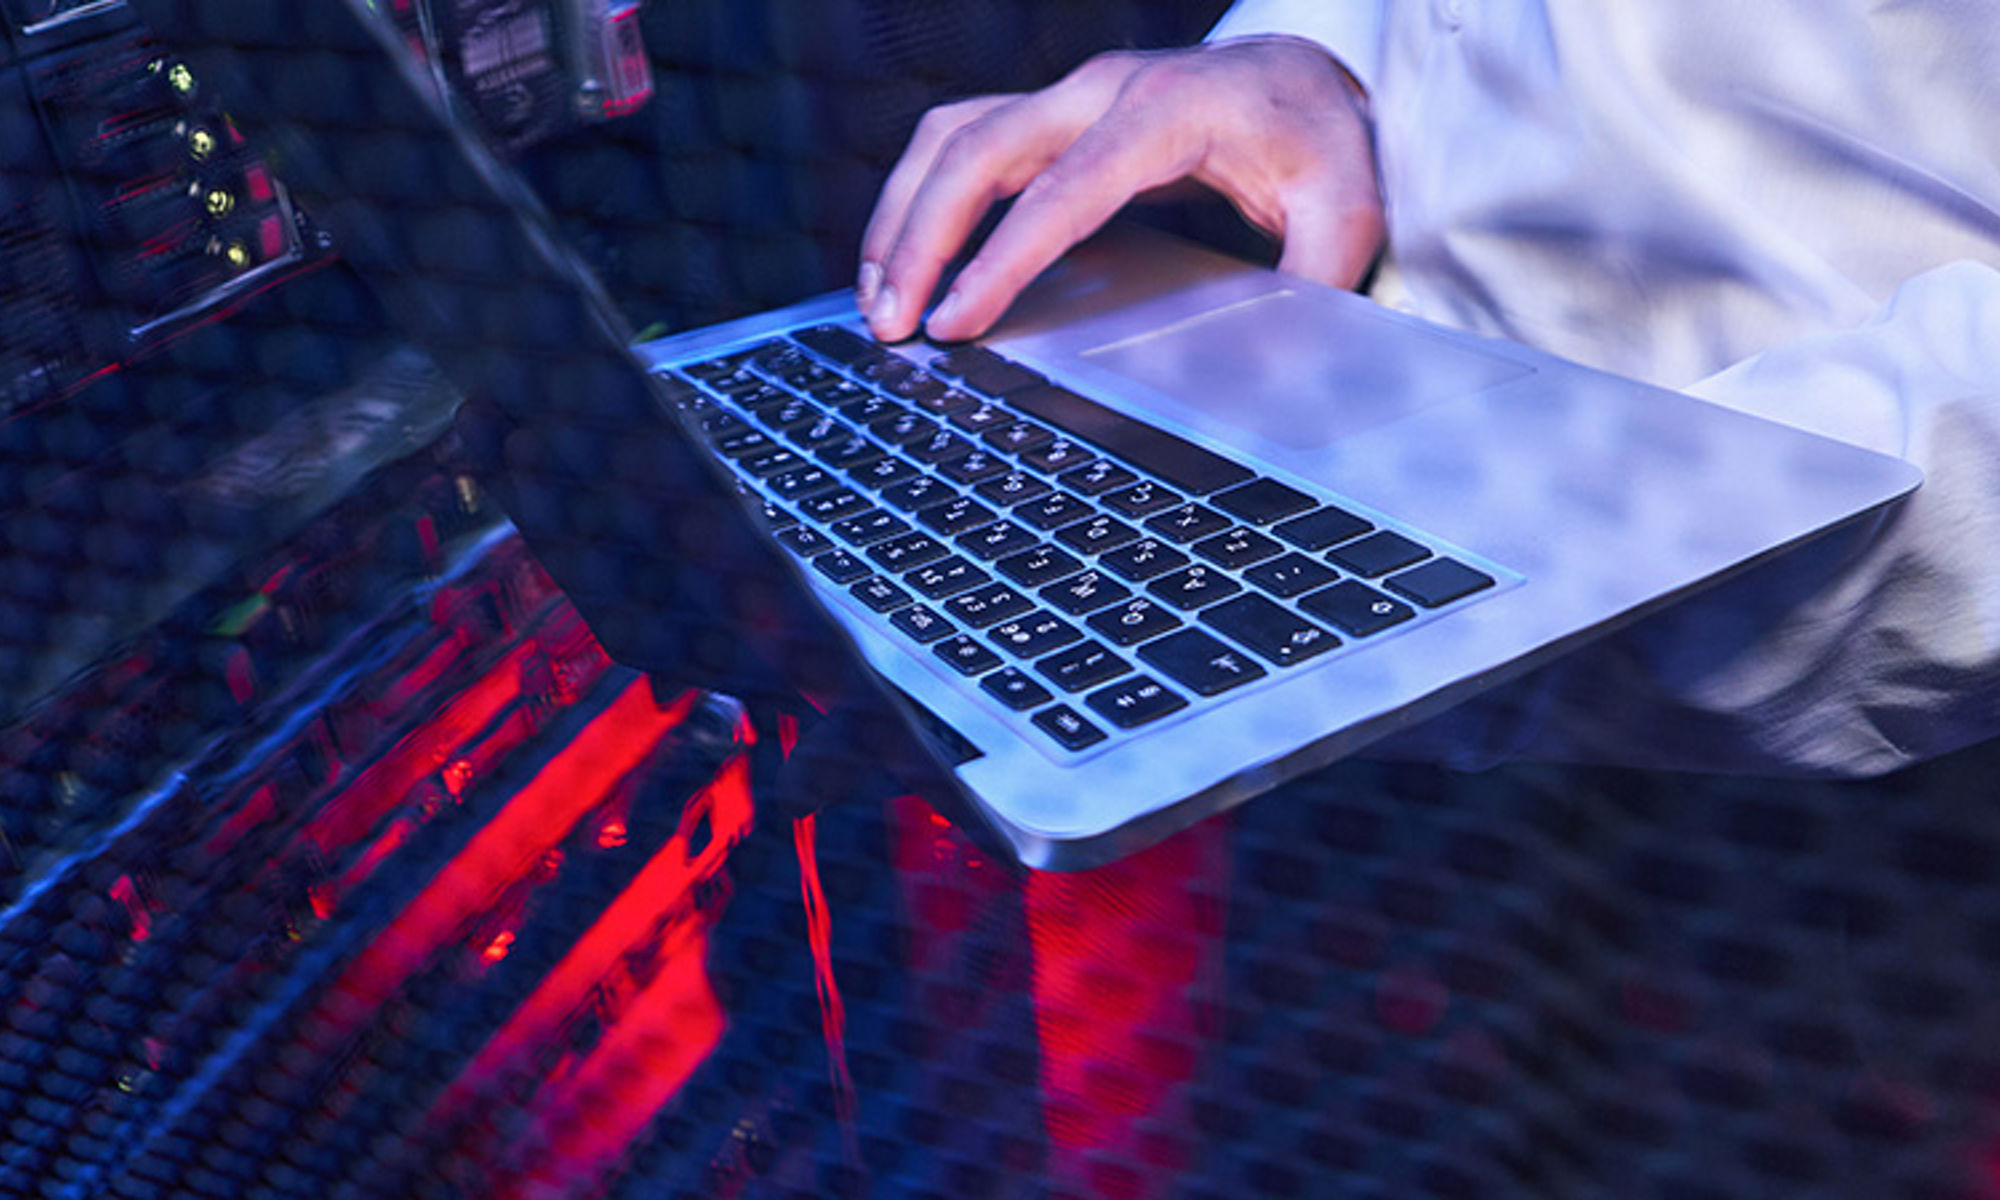 A laptop on a clear desk with red underlighting and a hand touching the keyboard.